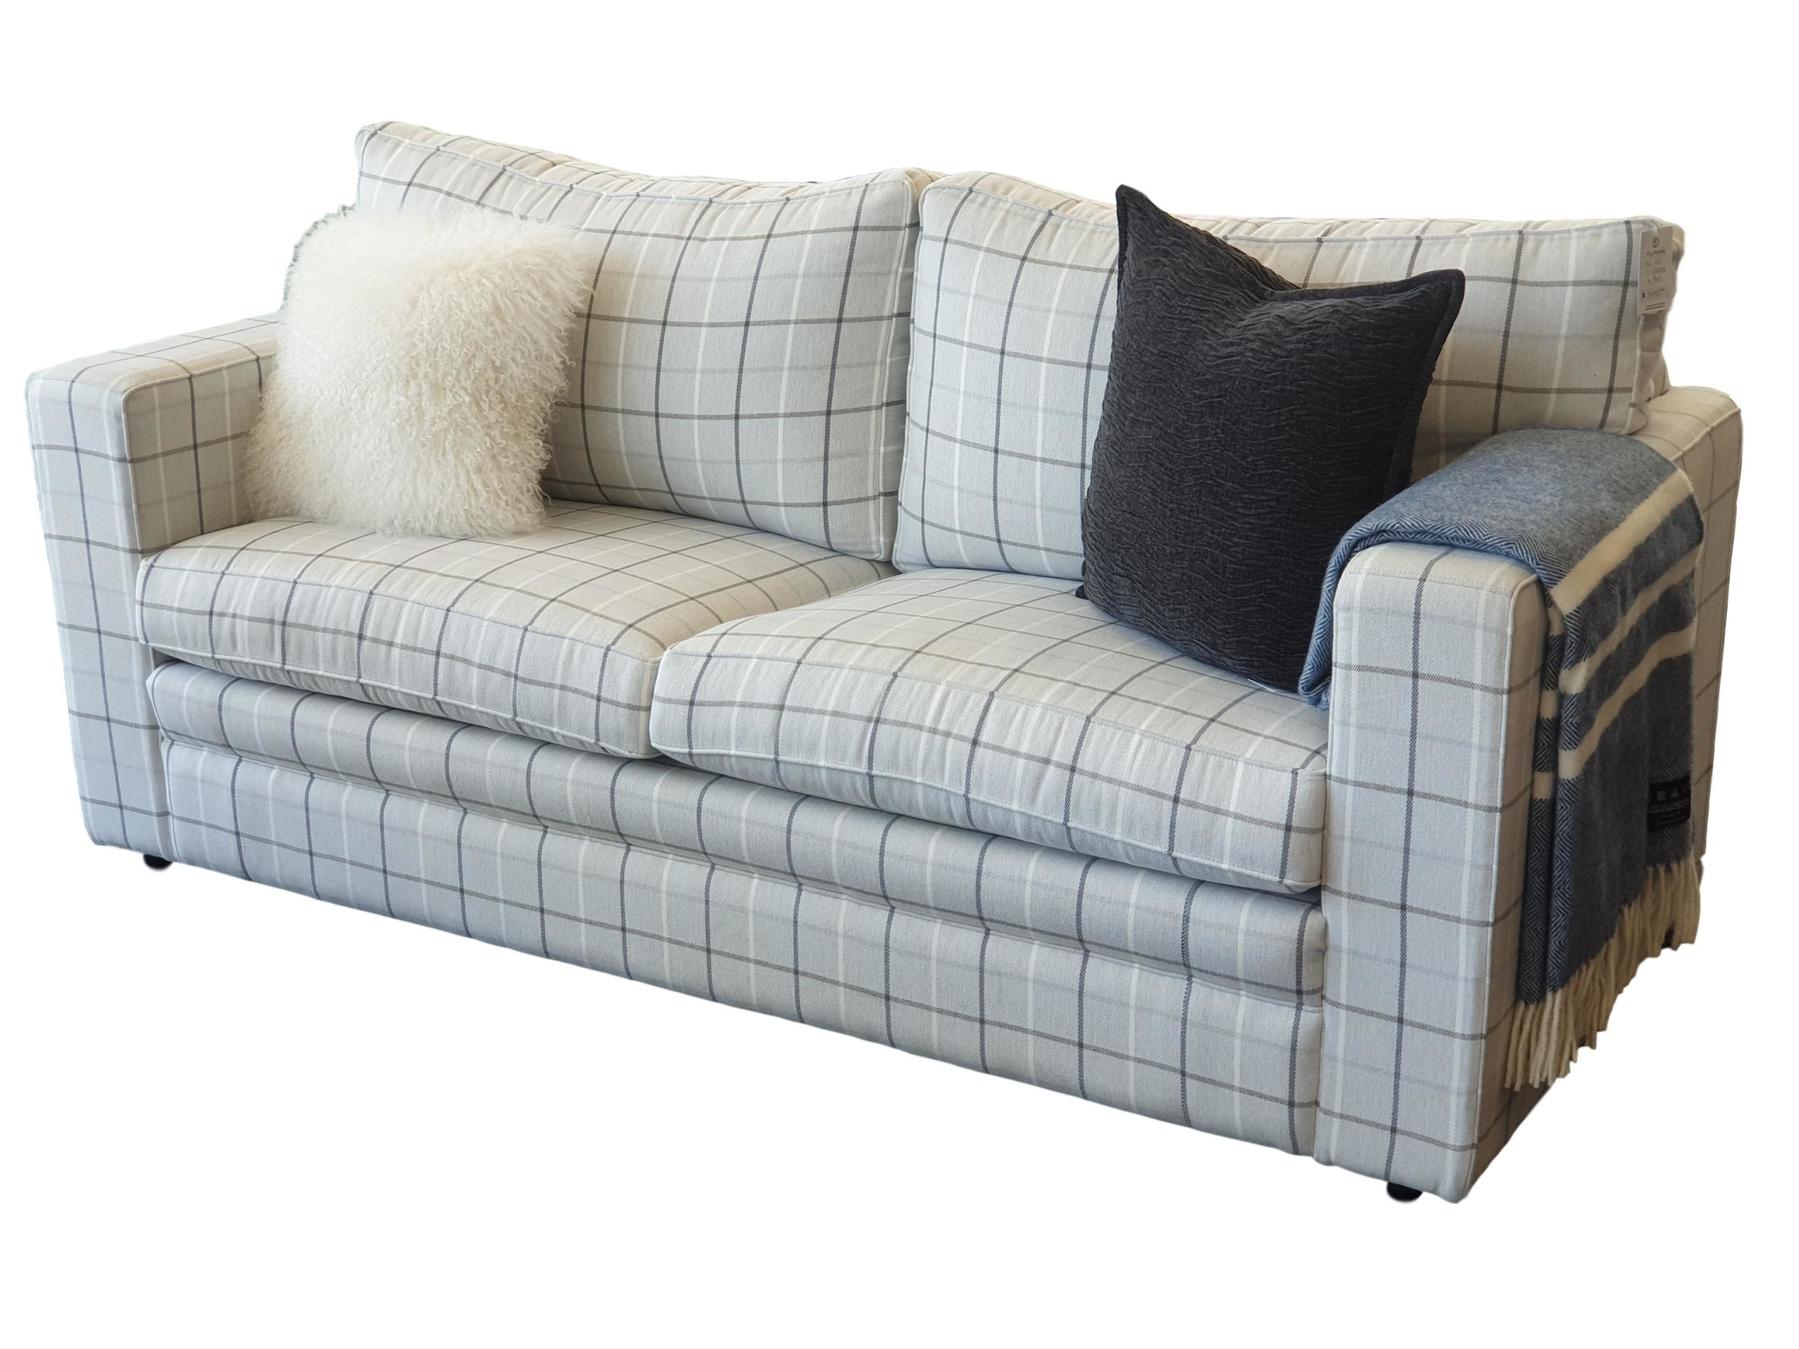 Pace furniture Bel Air sofa with flat arm